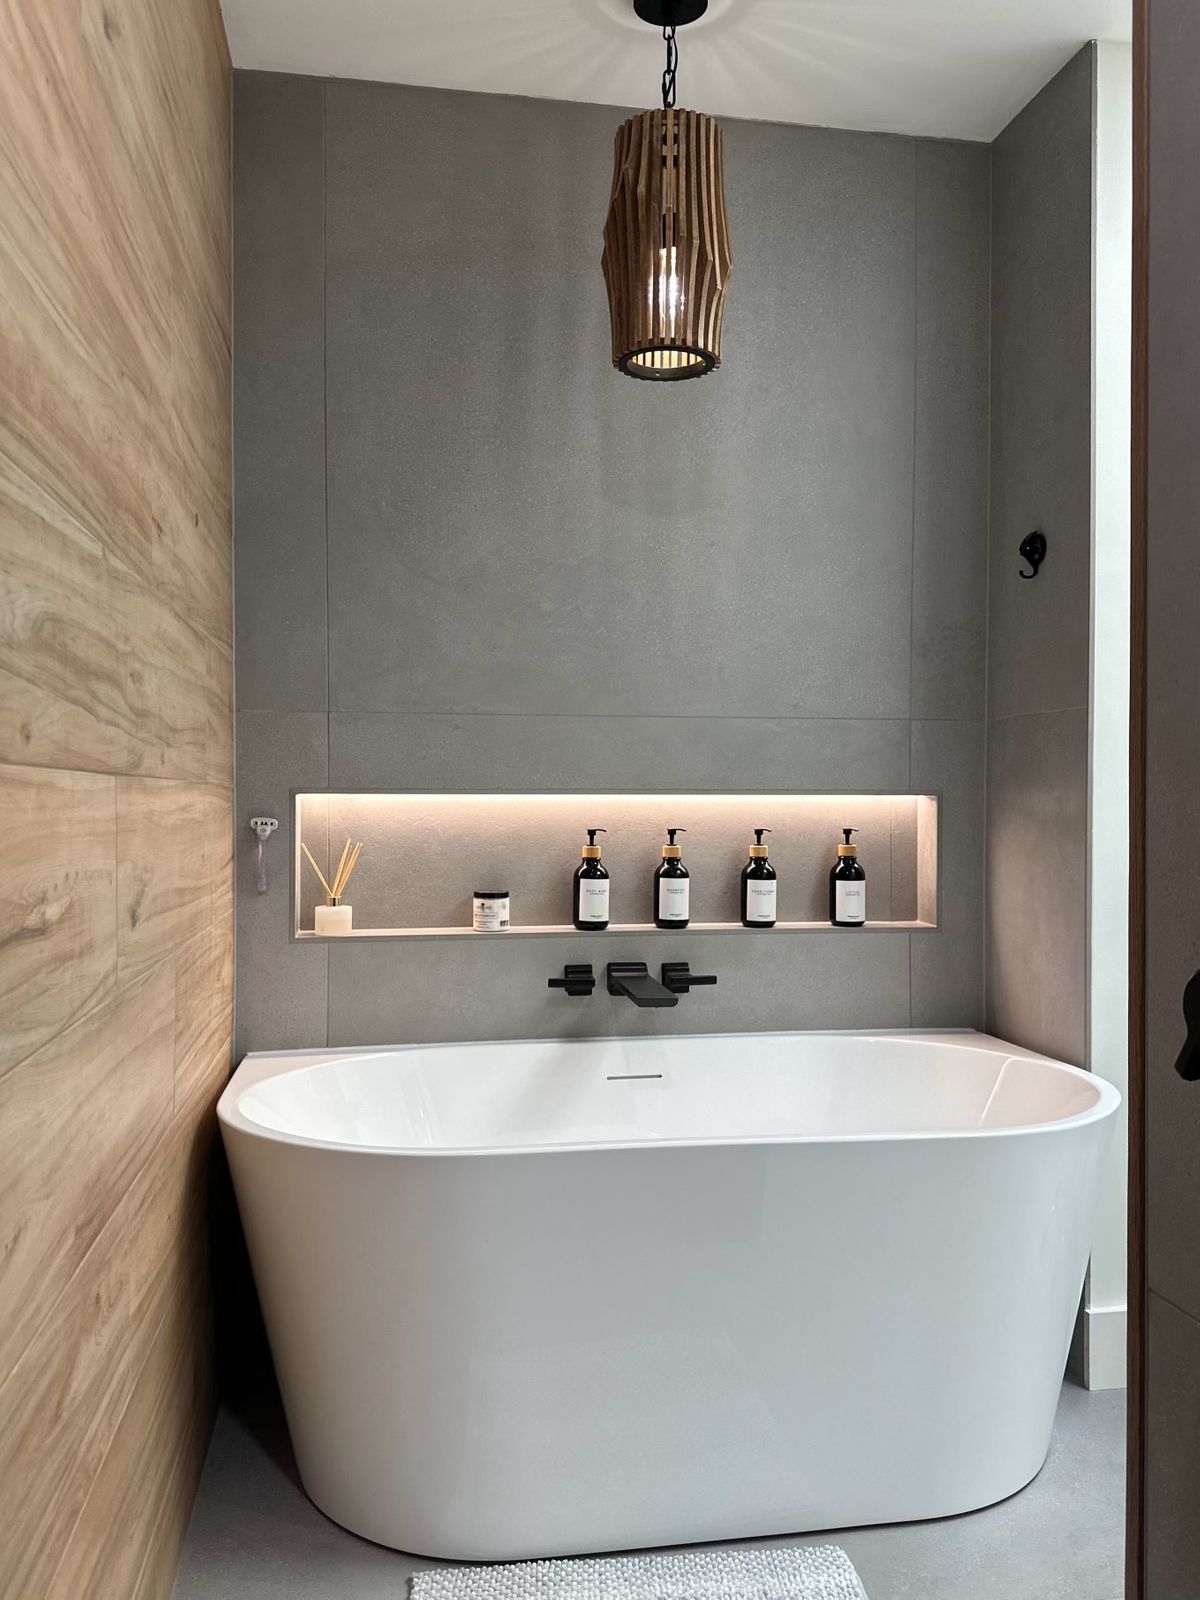 Bathroom Design: Free-Standing Tub with IN4913 LED Niche